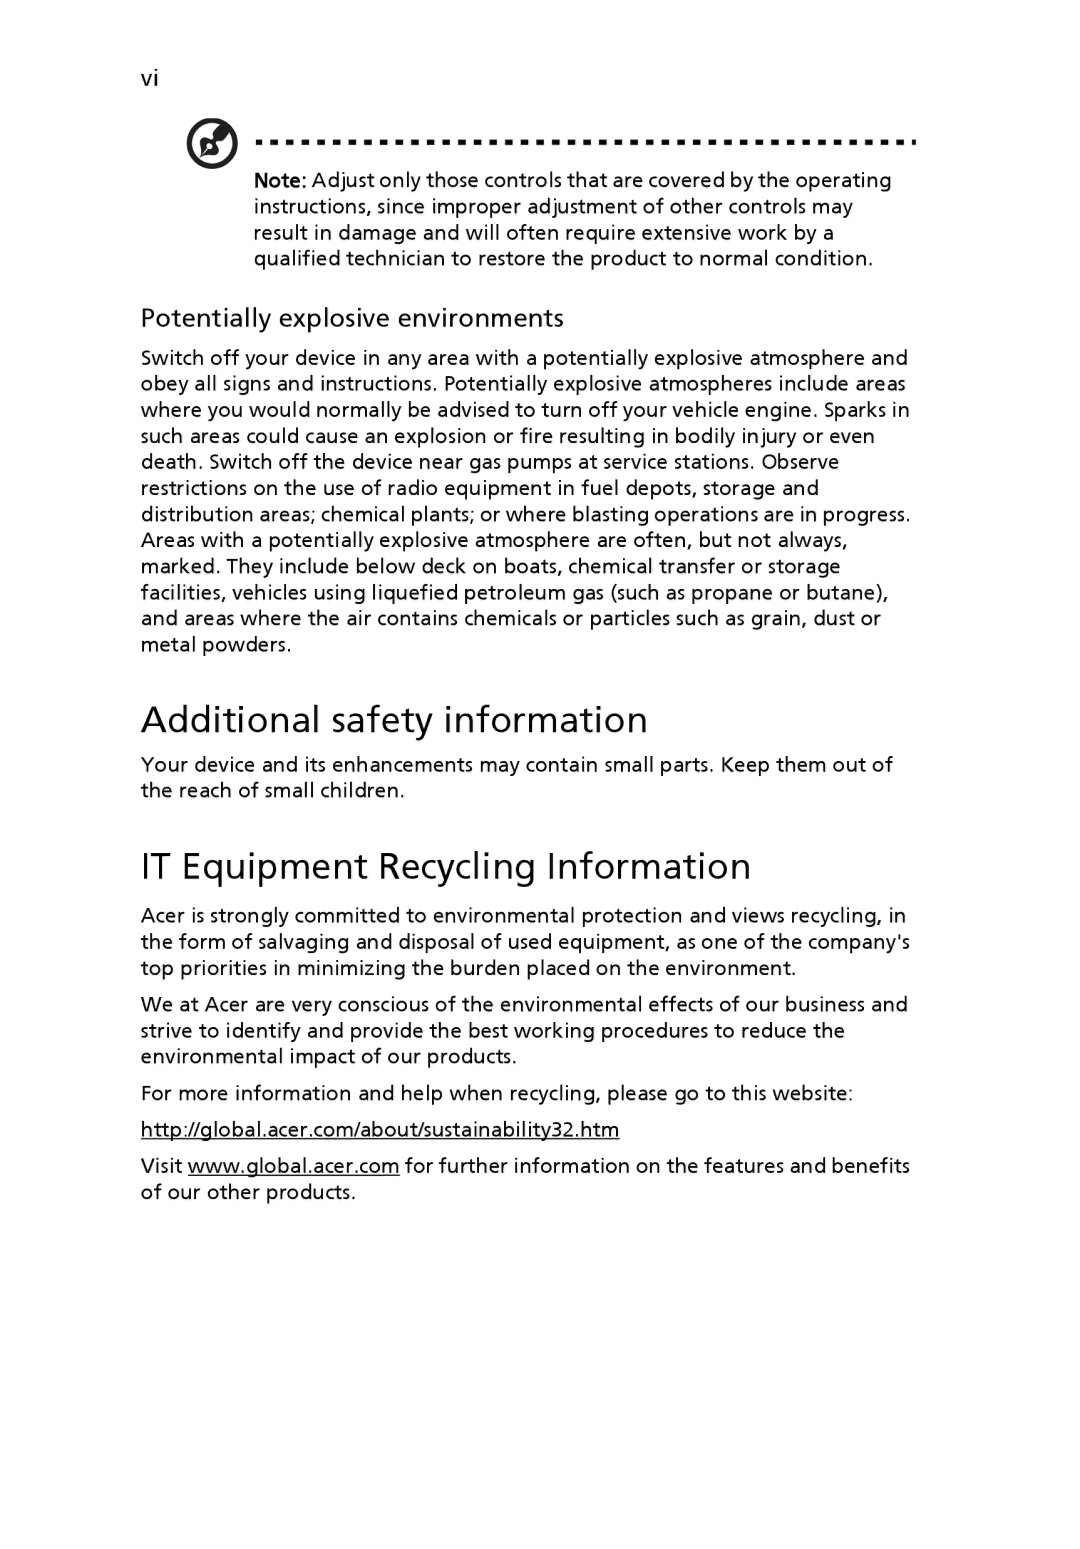 Acer V173 manual Additional safety information, IT Equipment Recycling Information, Potentially explosive environments 